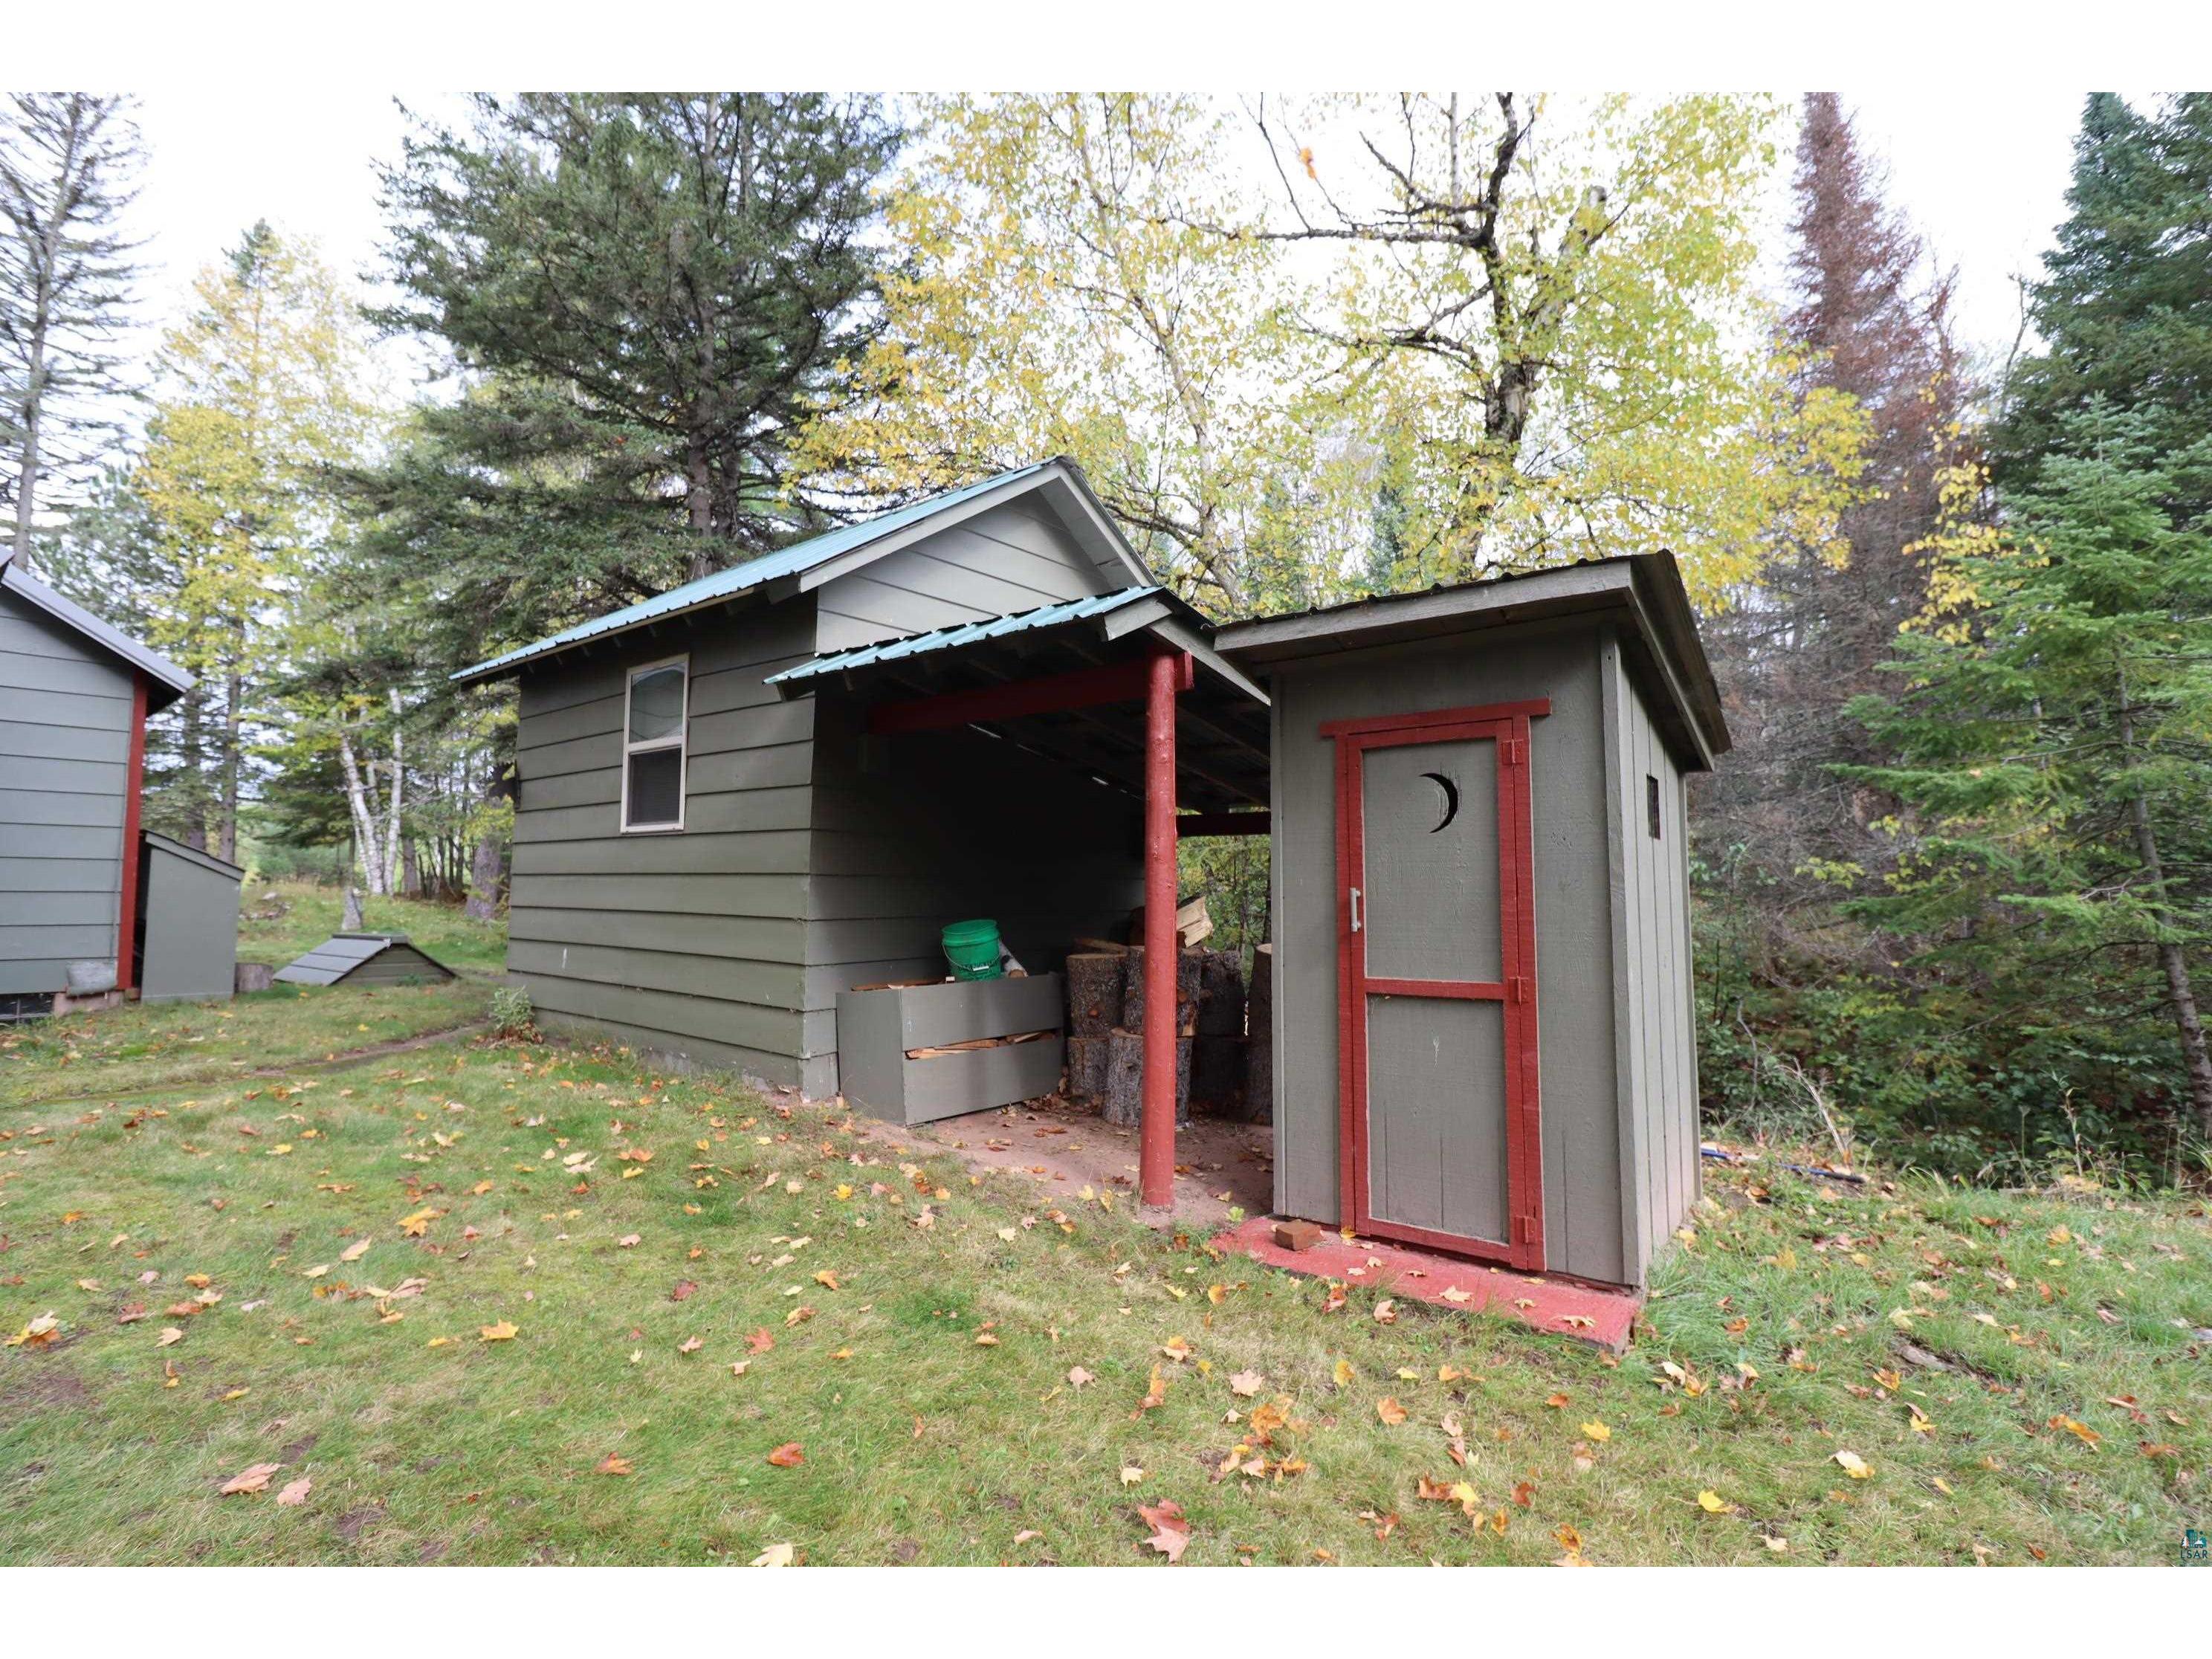 14385 Cranberry River Rd Herbster WI 54844 - Cranberry 6112855 image34